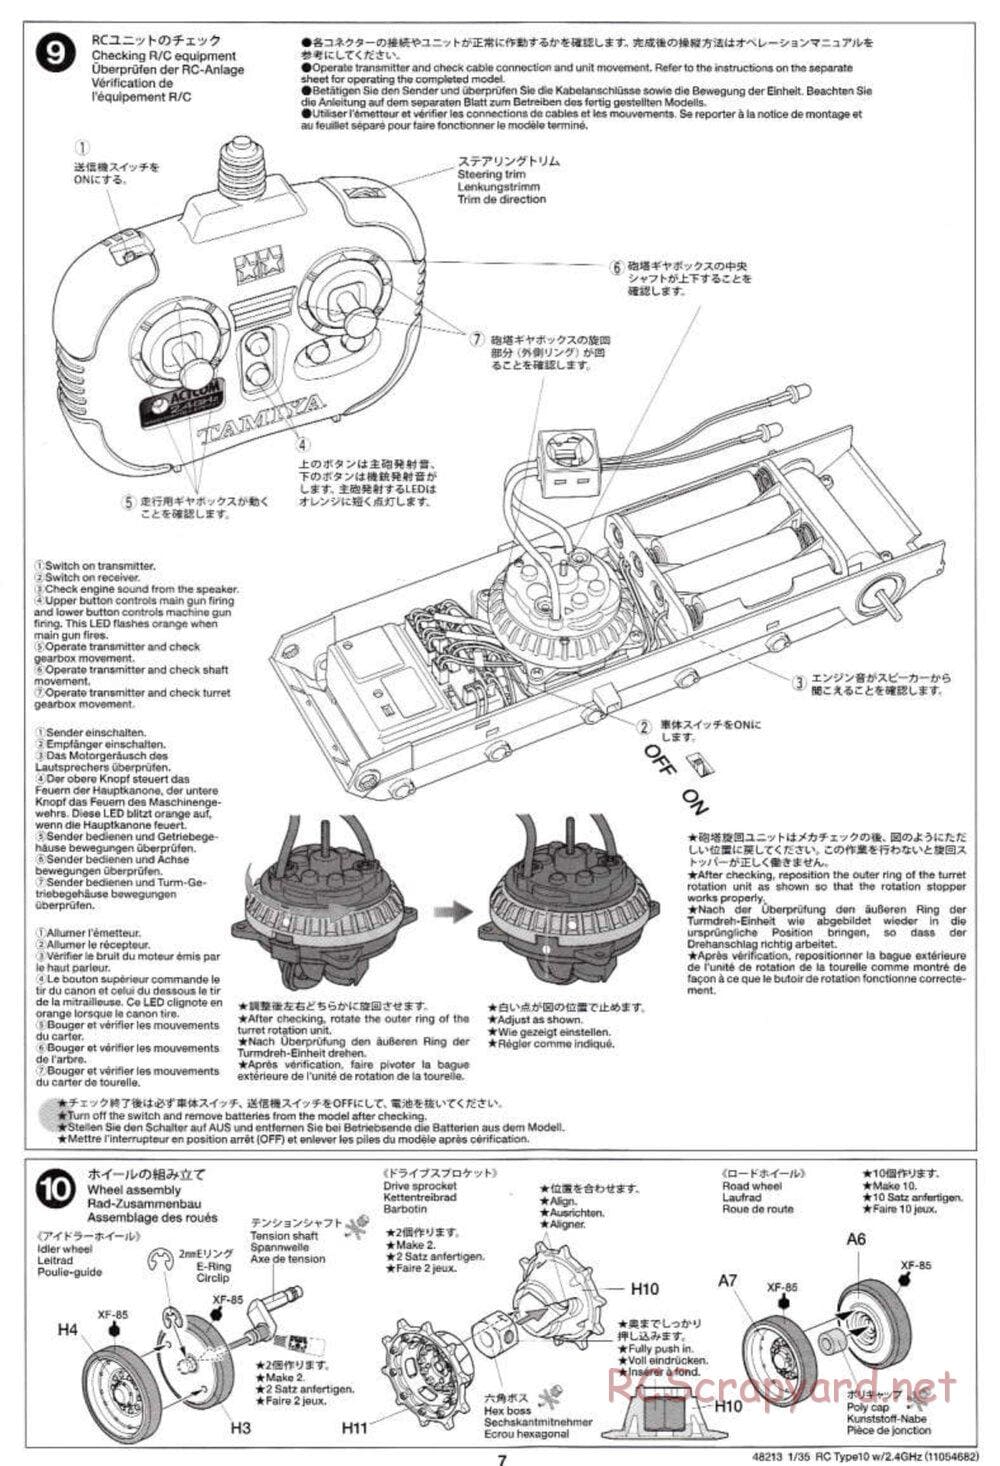 Tamiya - JGSDF Type 10 Tank - 1/35 Scale Chassis - Manual - Page 7